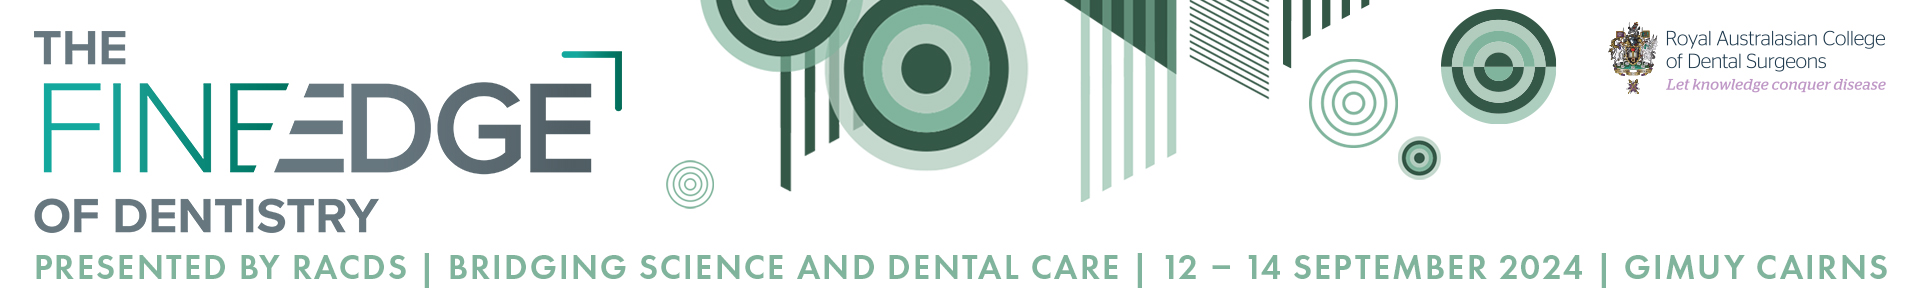 The Fine Edge of Dentistry by the Royal Australasian College of Dental Surgeons